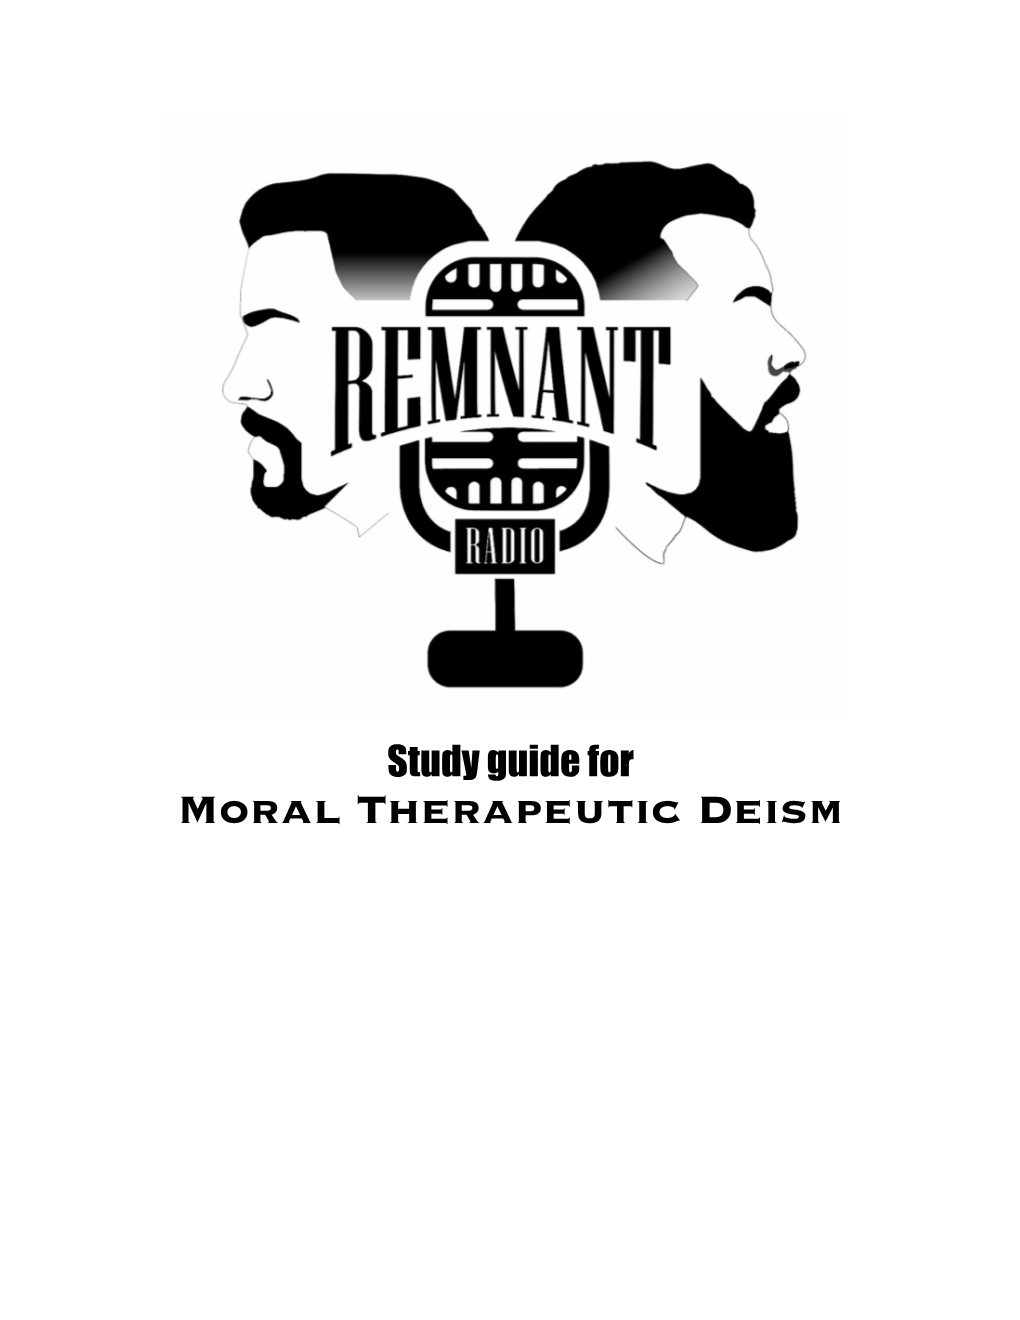 Moralistic Therapeutic Deism Comes from Sociologist Christian Smith It Is a Combination of Beliefs Producing a General Religious Outlook in American Teens